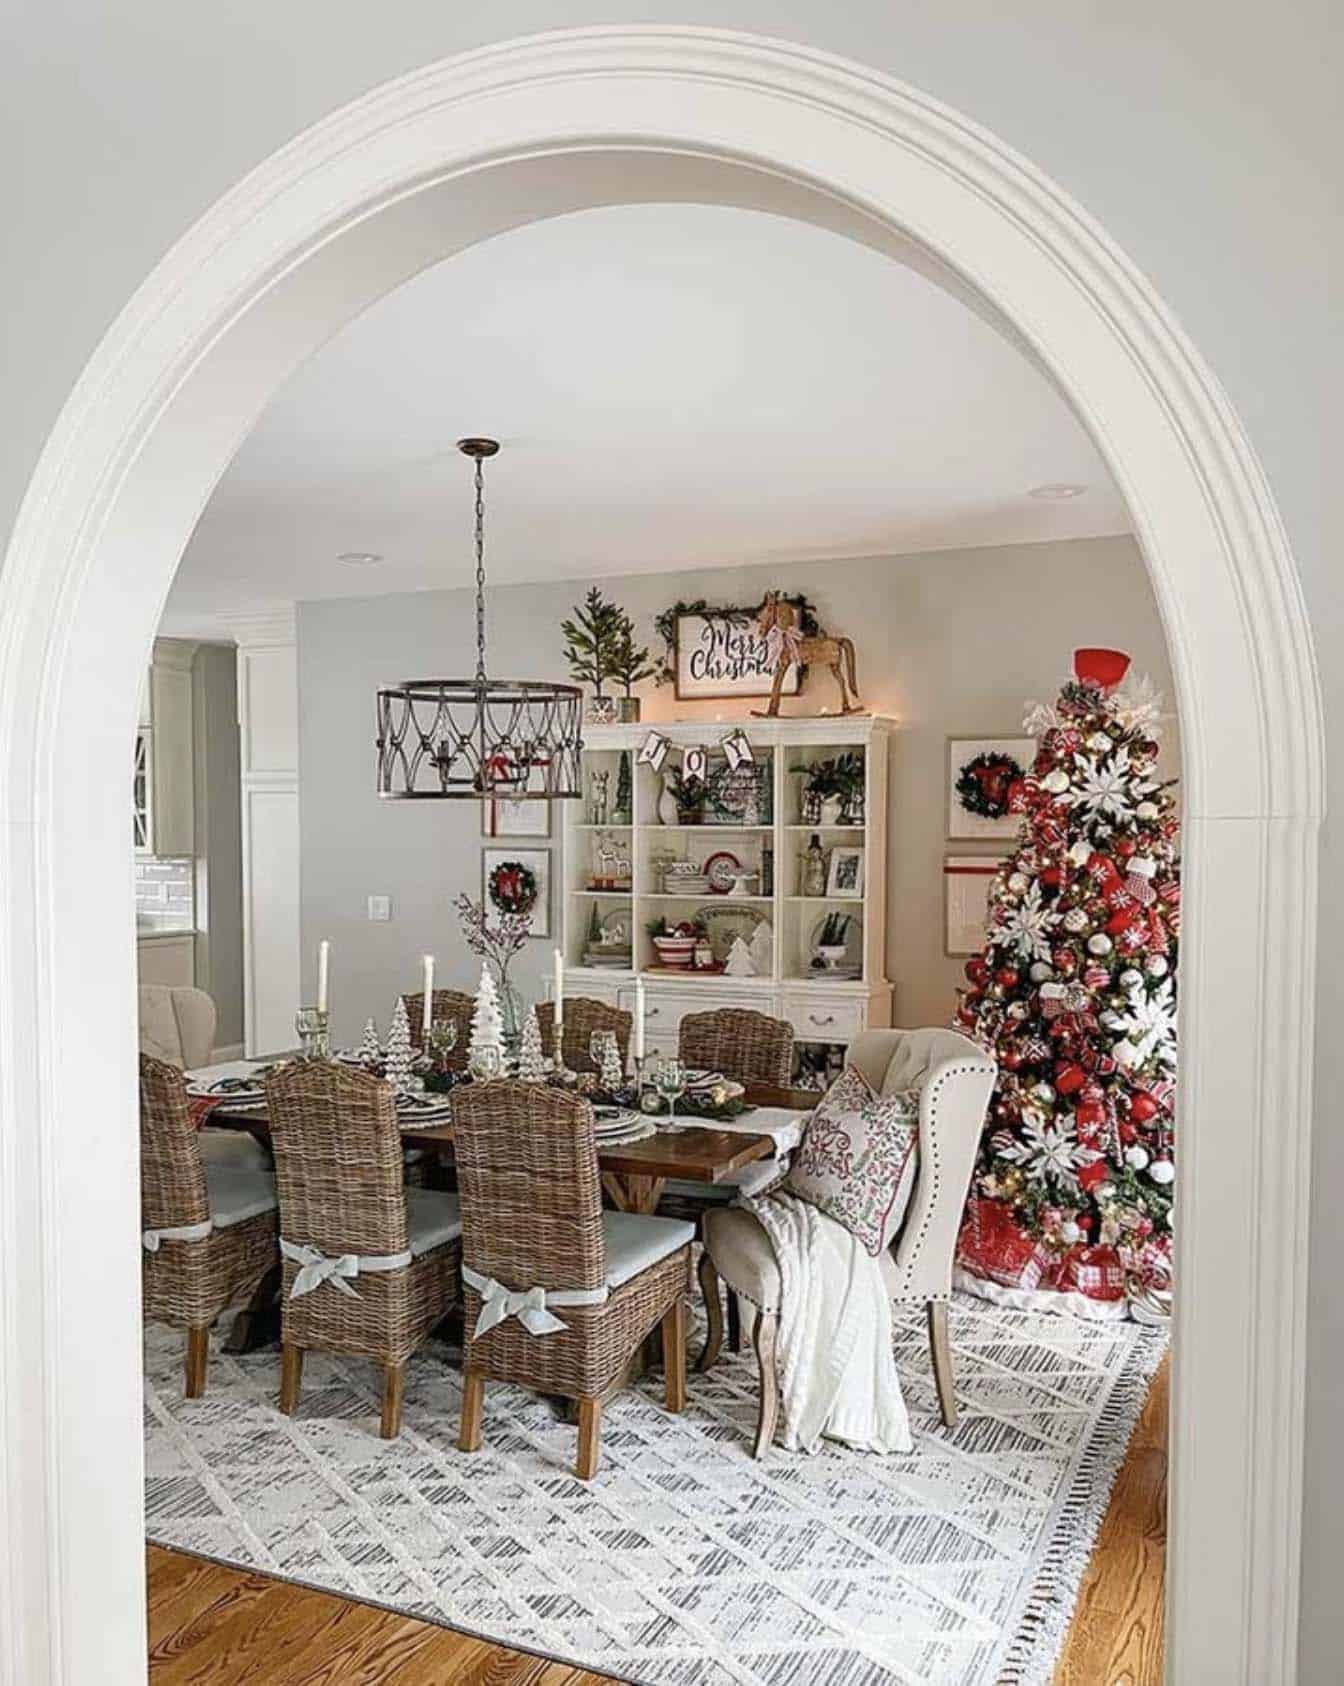 whimsical dining table with red and white Christmas decorations